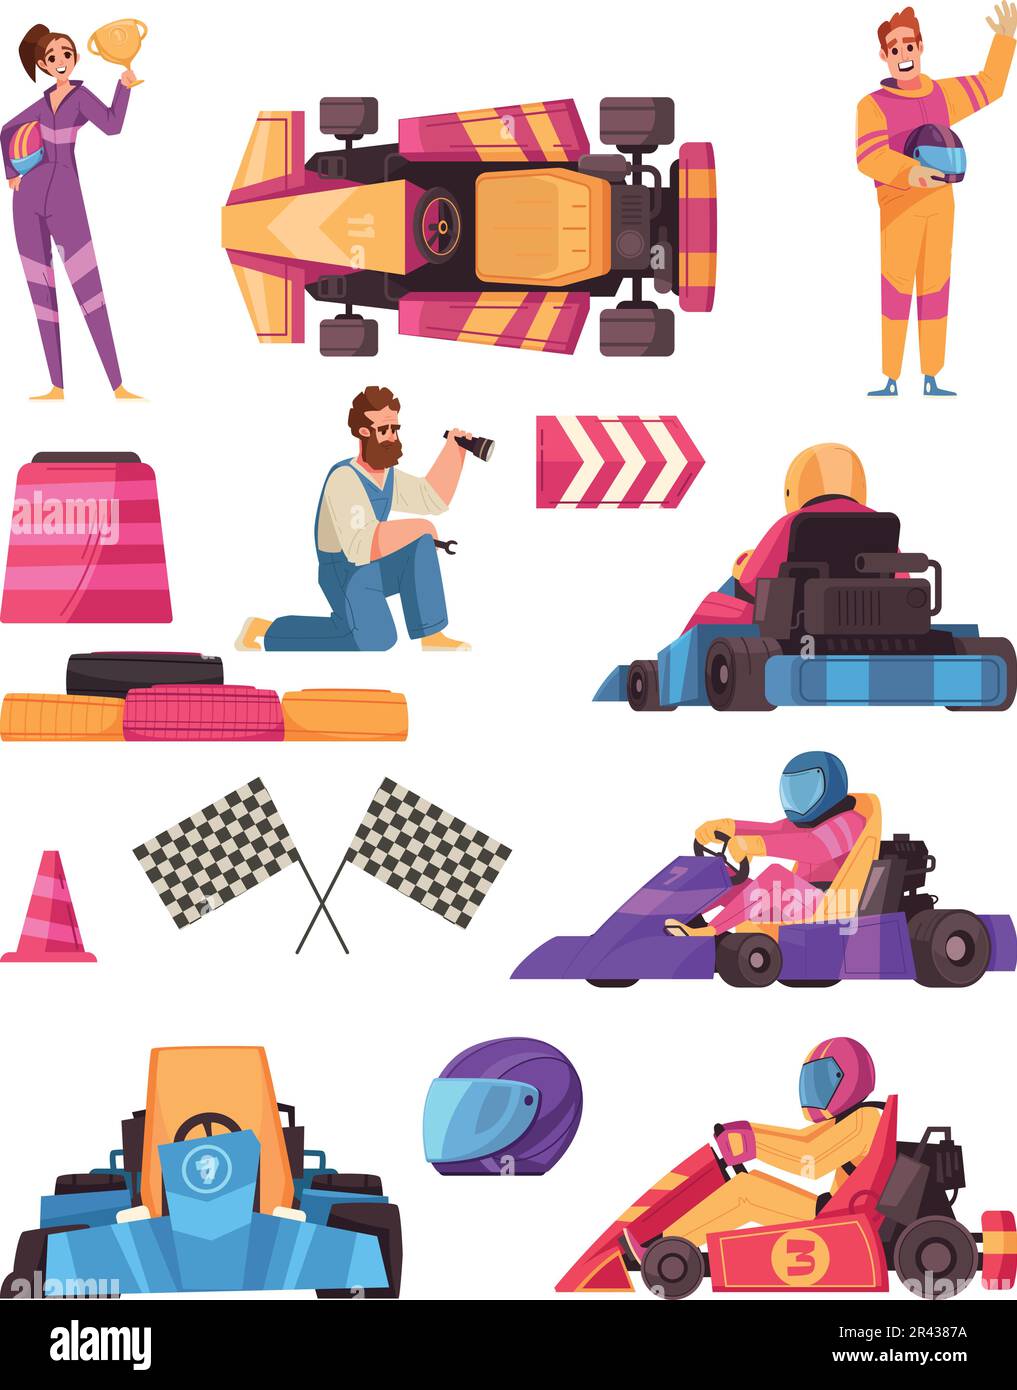 Karting cartoon icons set with racing cars and accessories isolated vector illustration Stock Vector